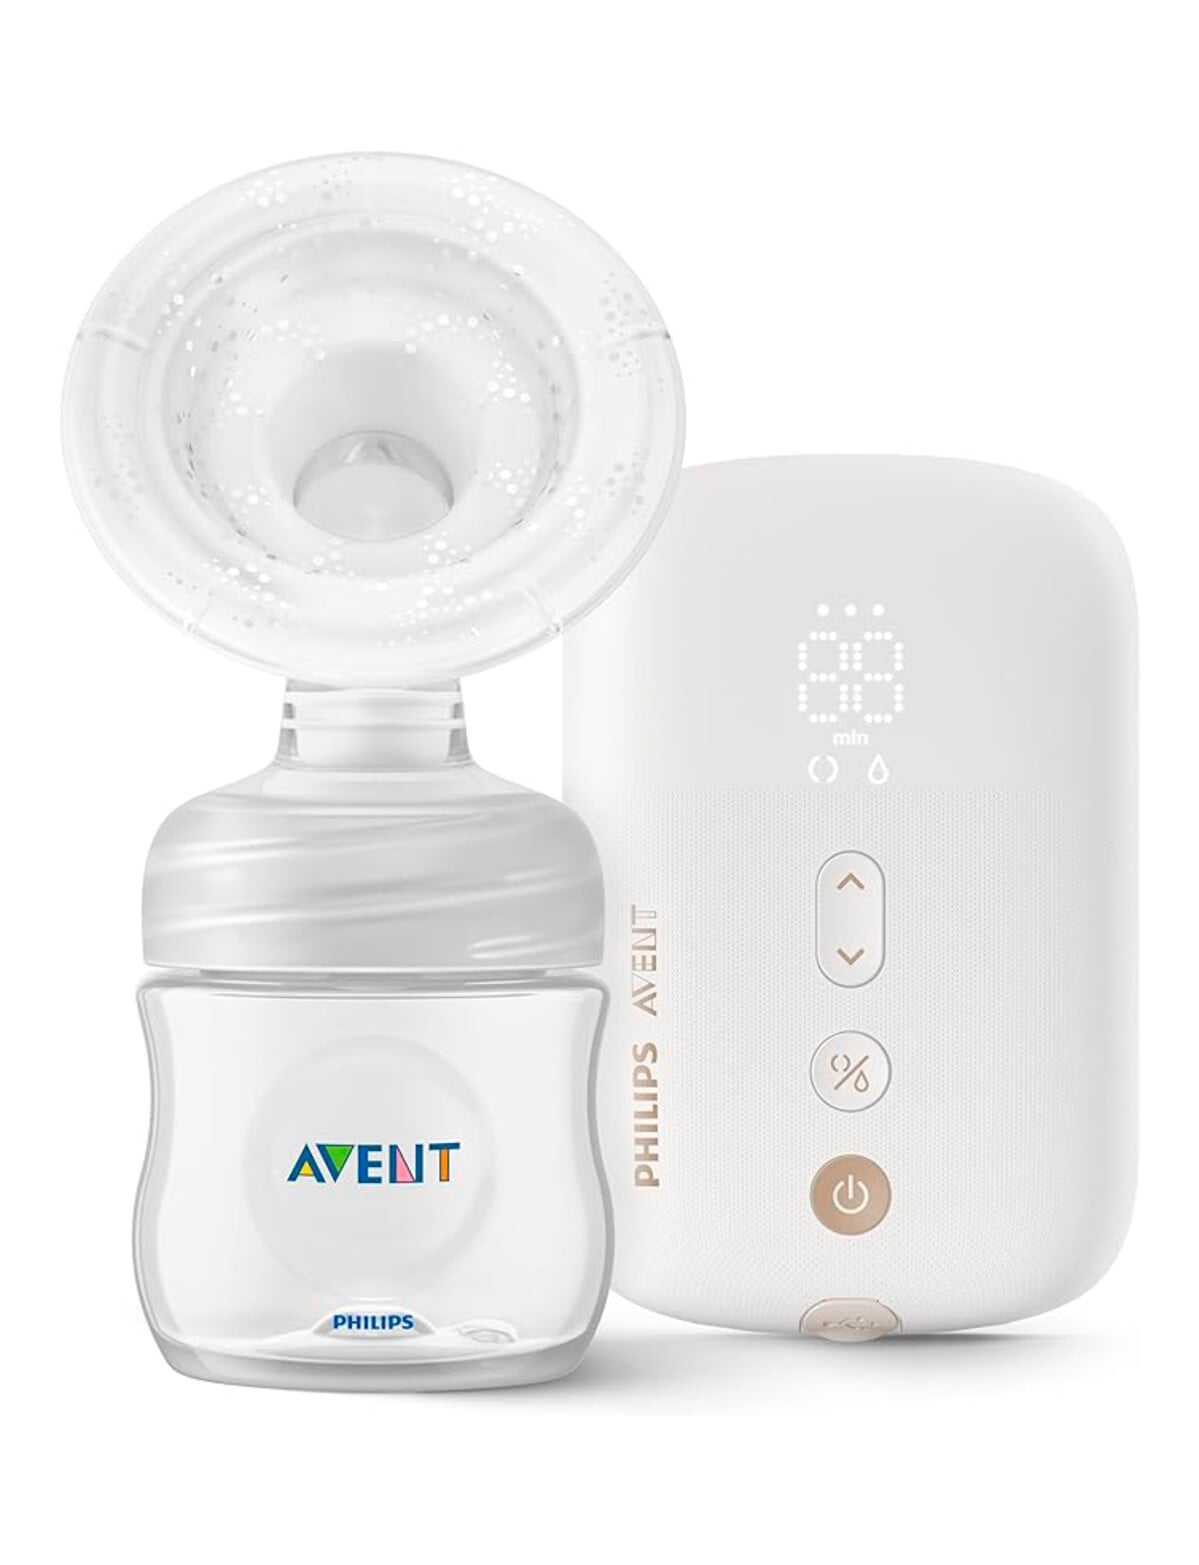 Avent Rechargeable Electric Breast Pump - Feeding